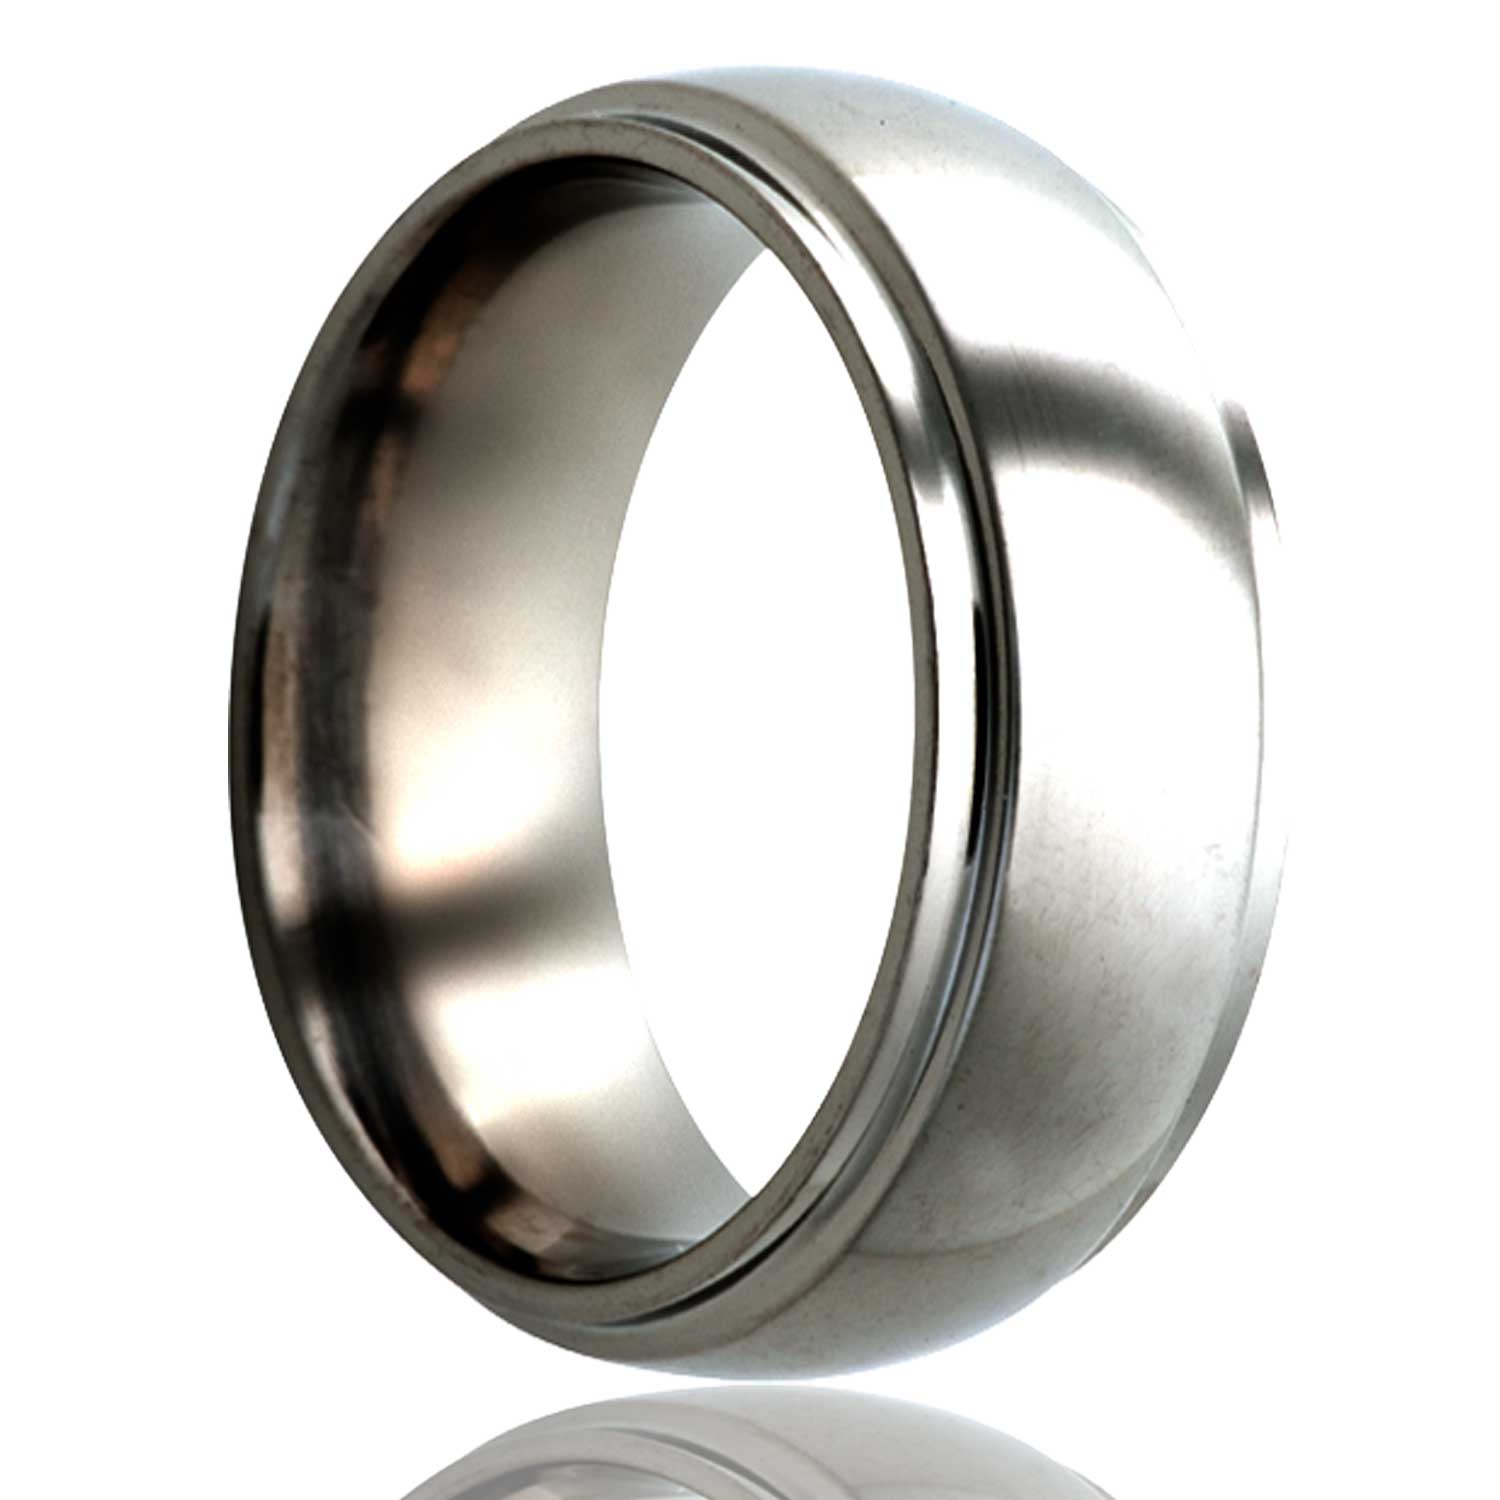 A domed titanium wedding band with stepped edges displayed on a neutral white background.